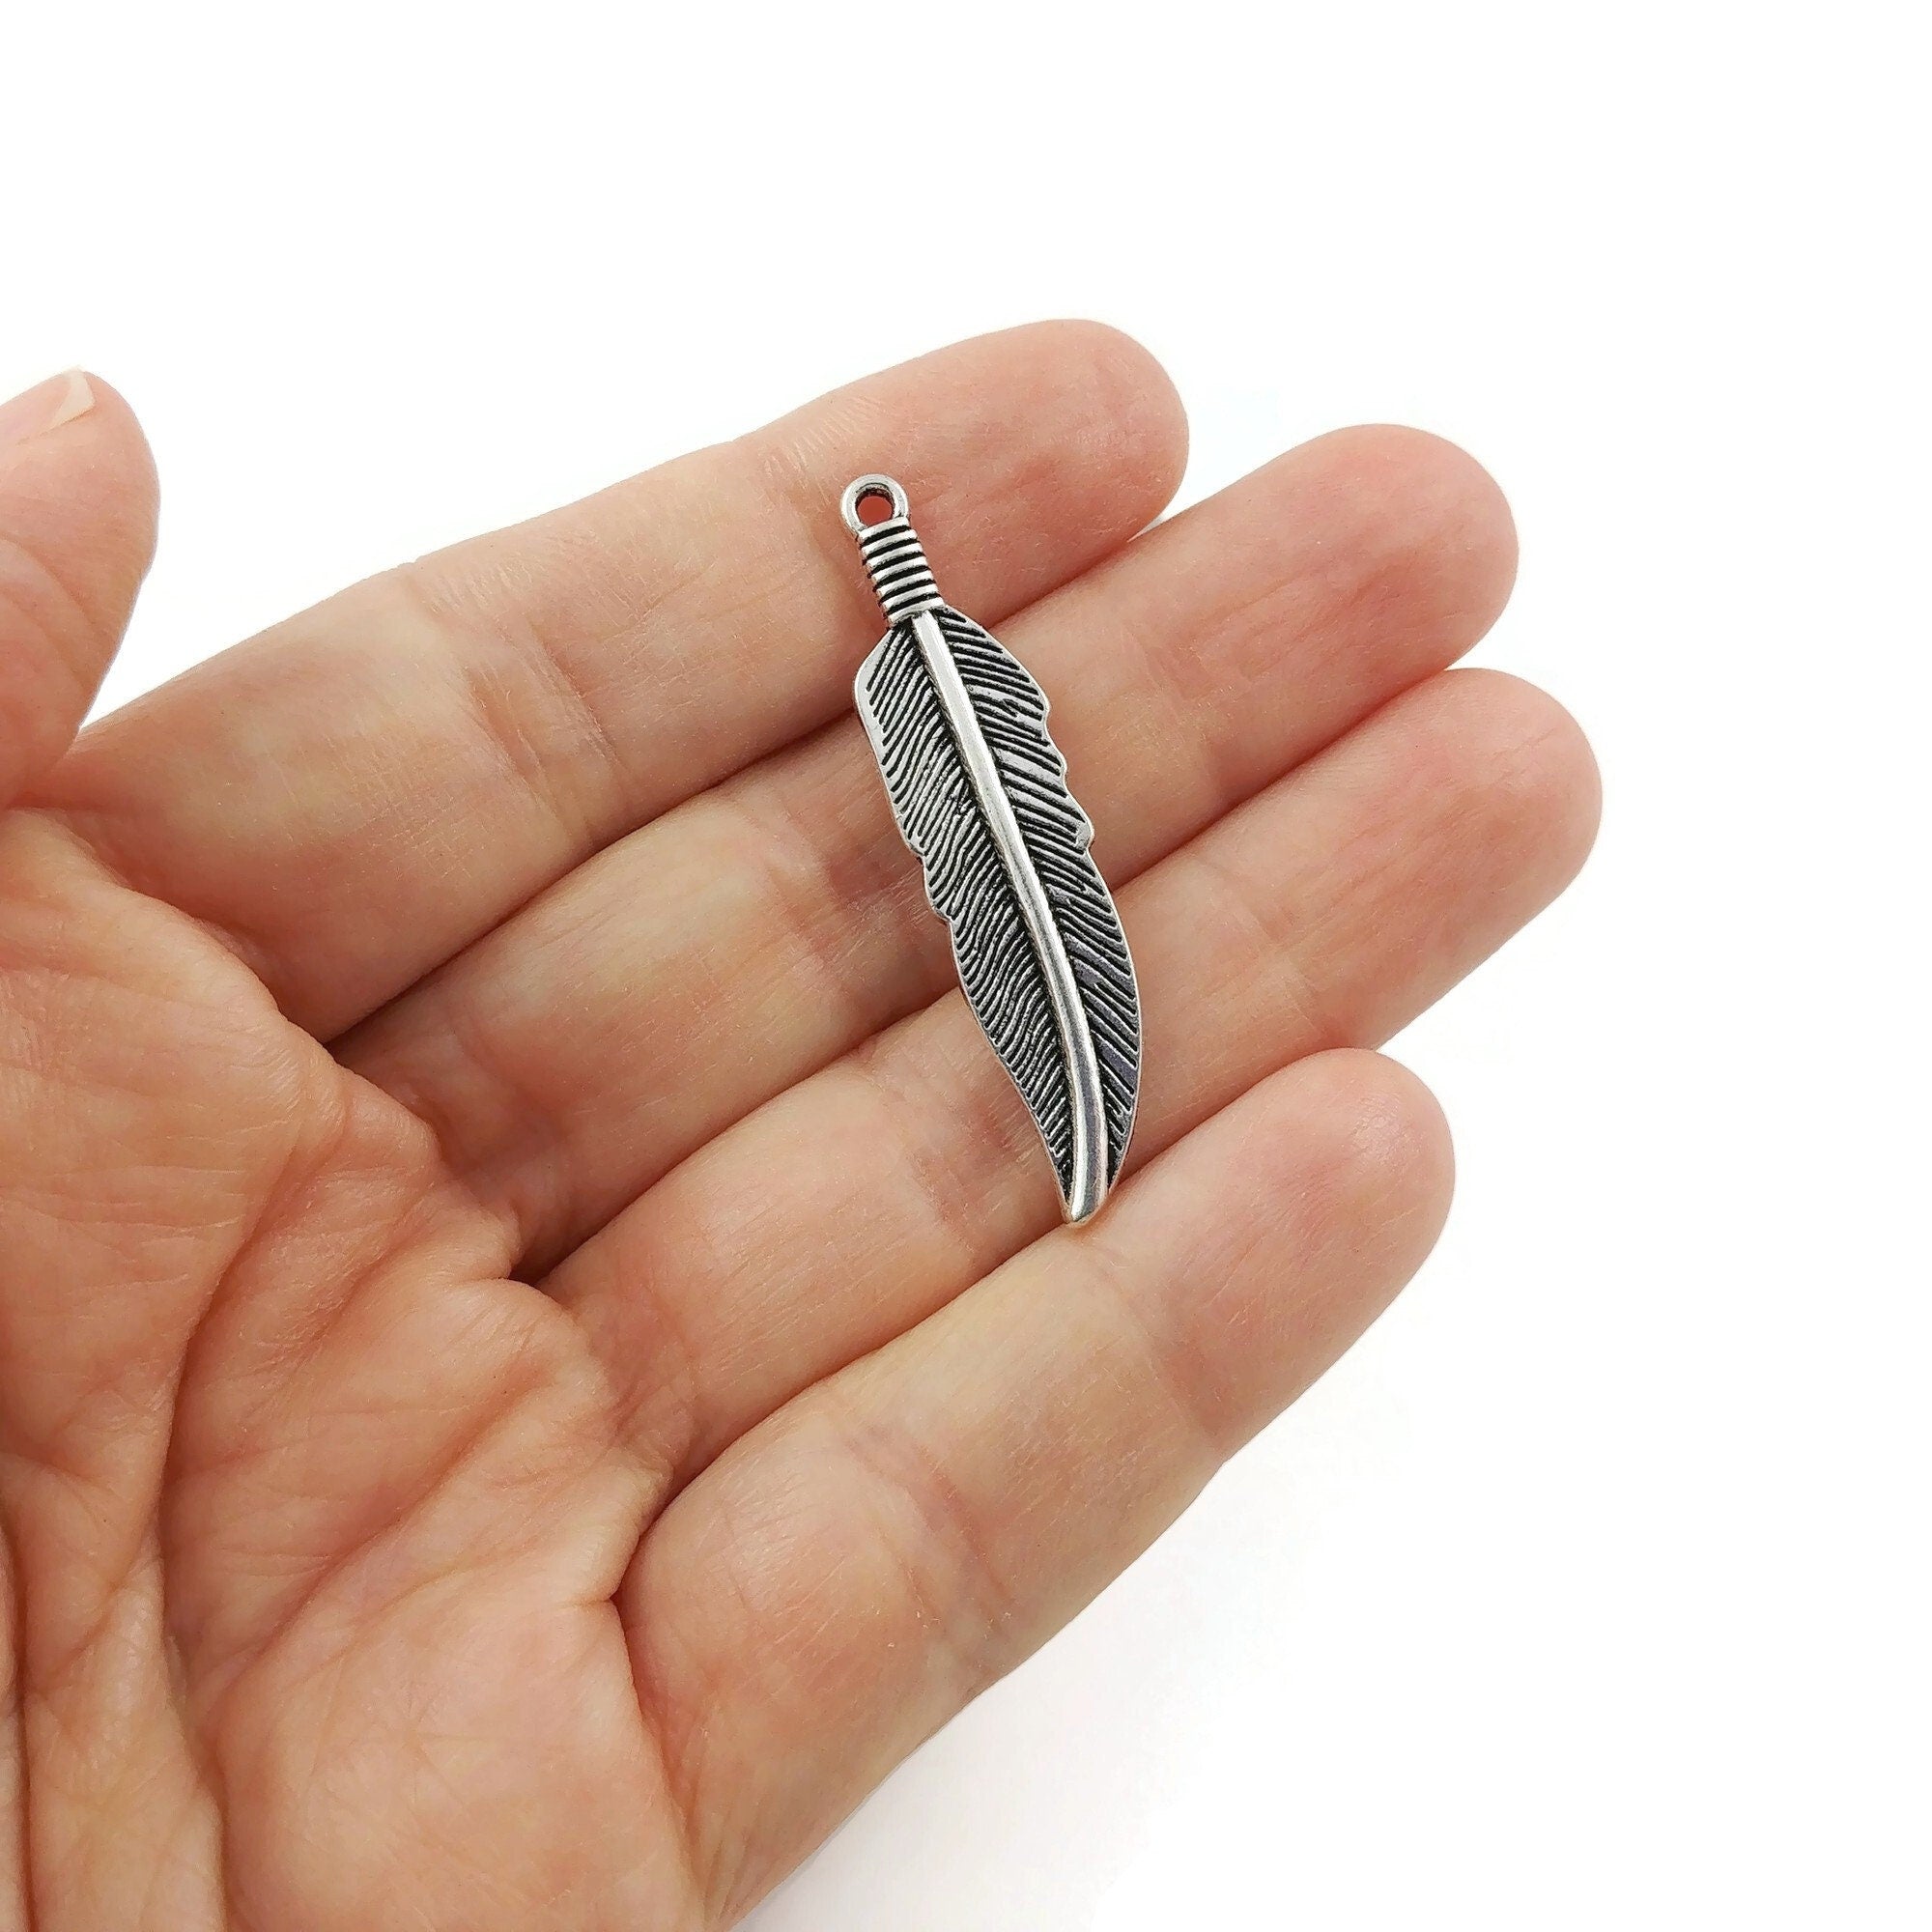 5 feather charms, 40mm nickel free metal pendants, 3D charms for jewelry making